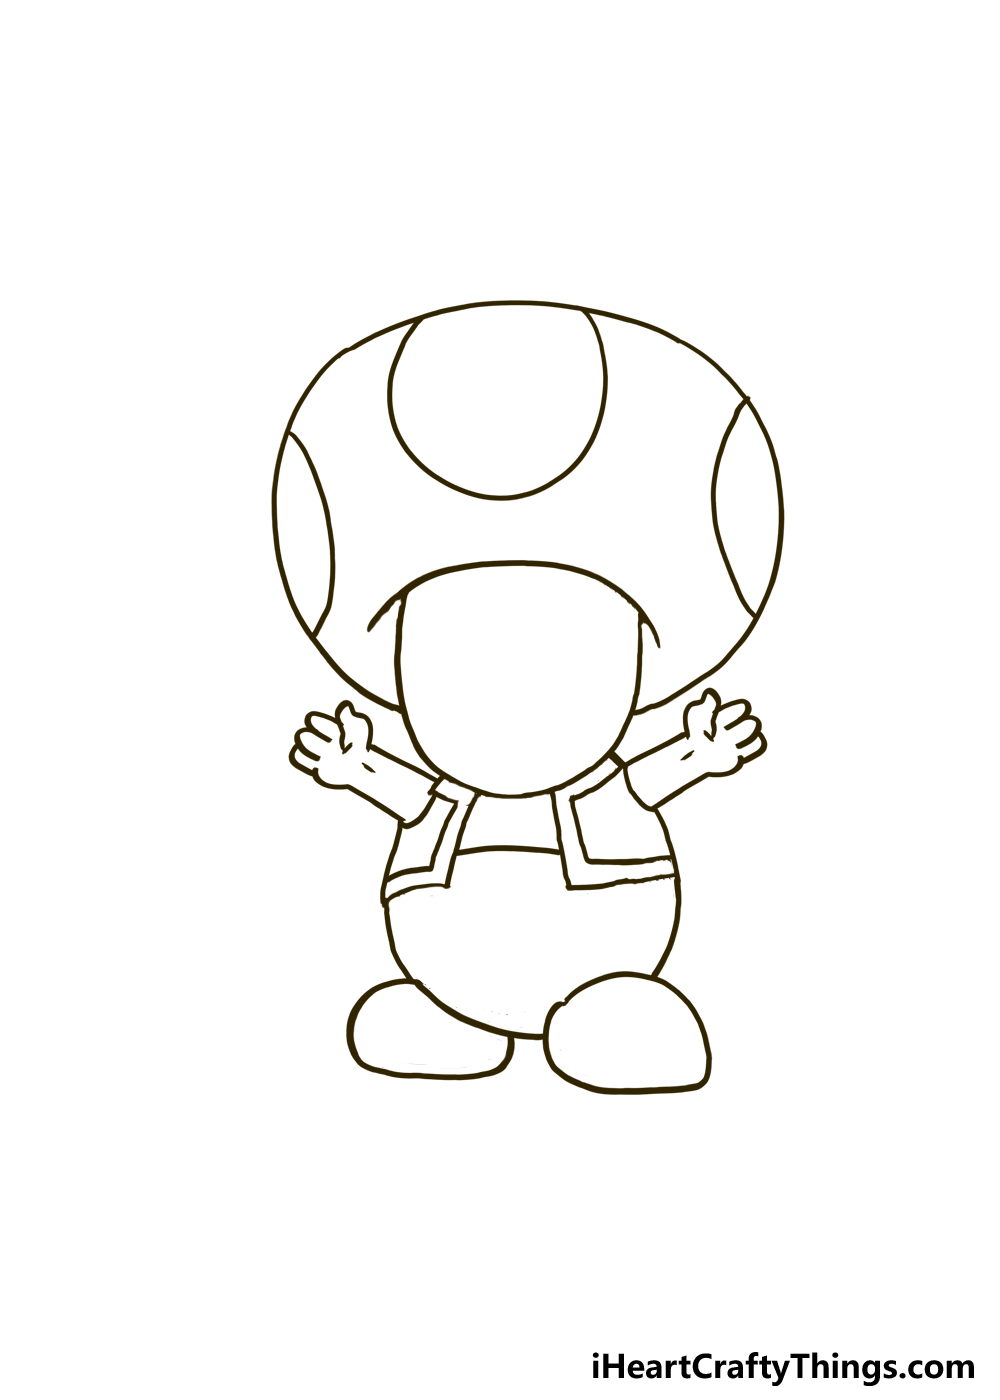 How to Draw Toad from Mario step 4